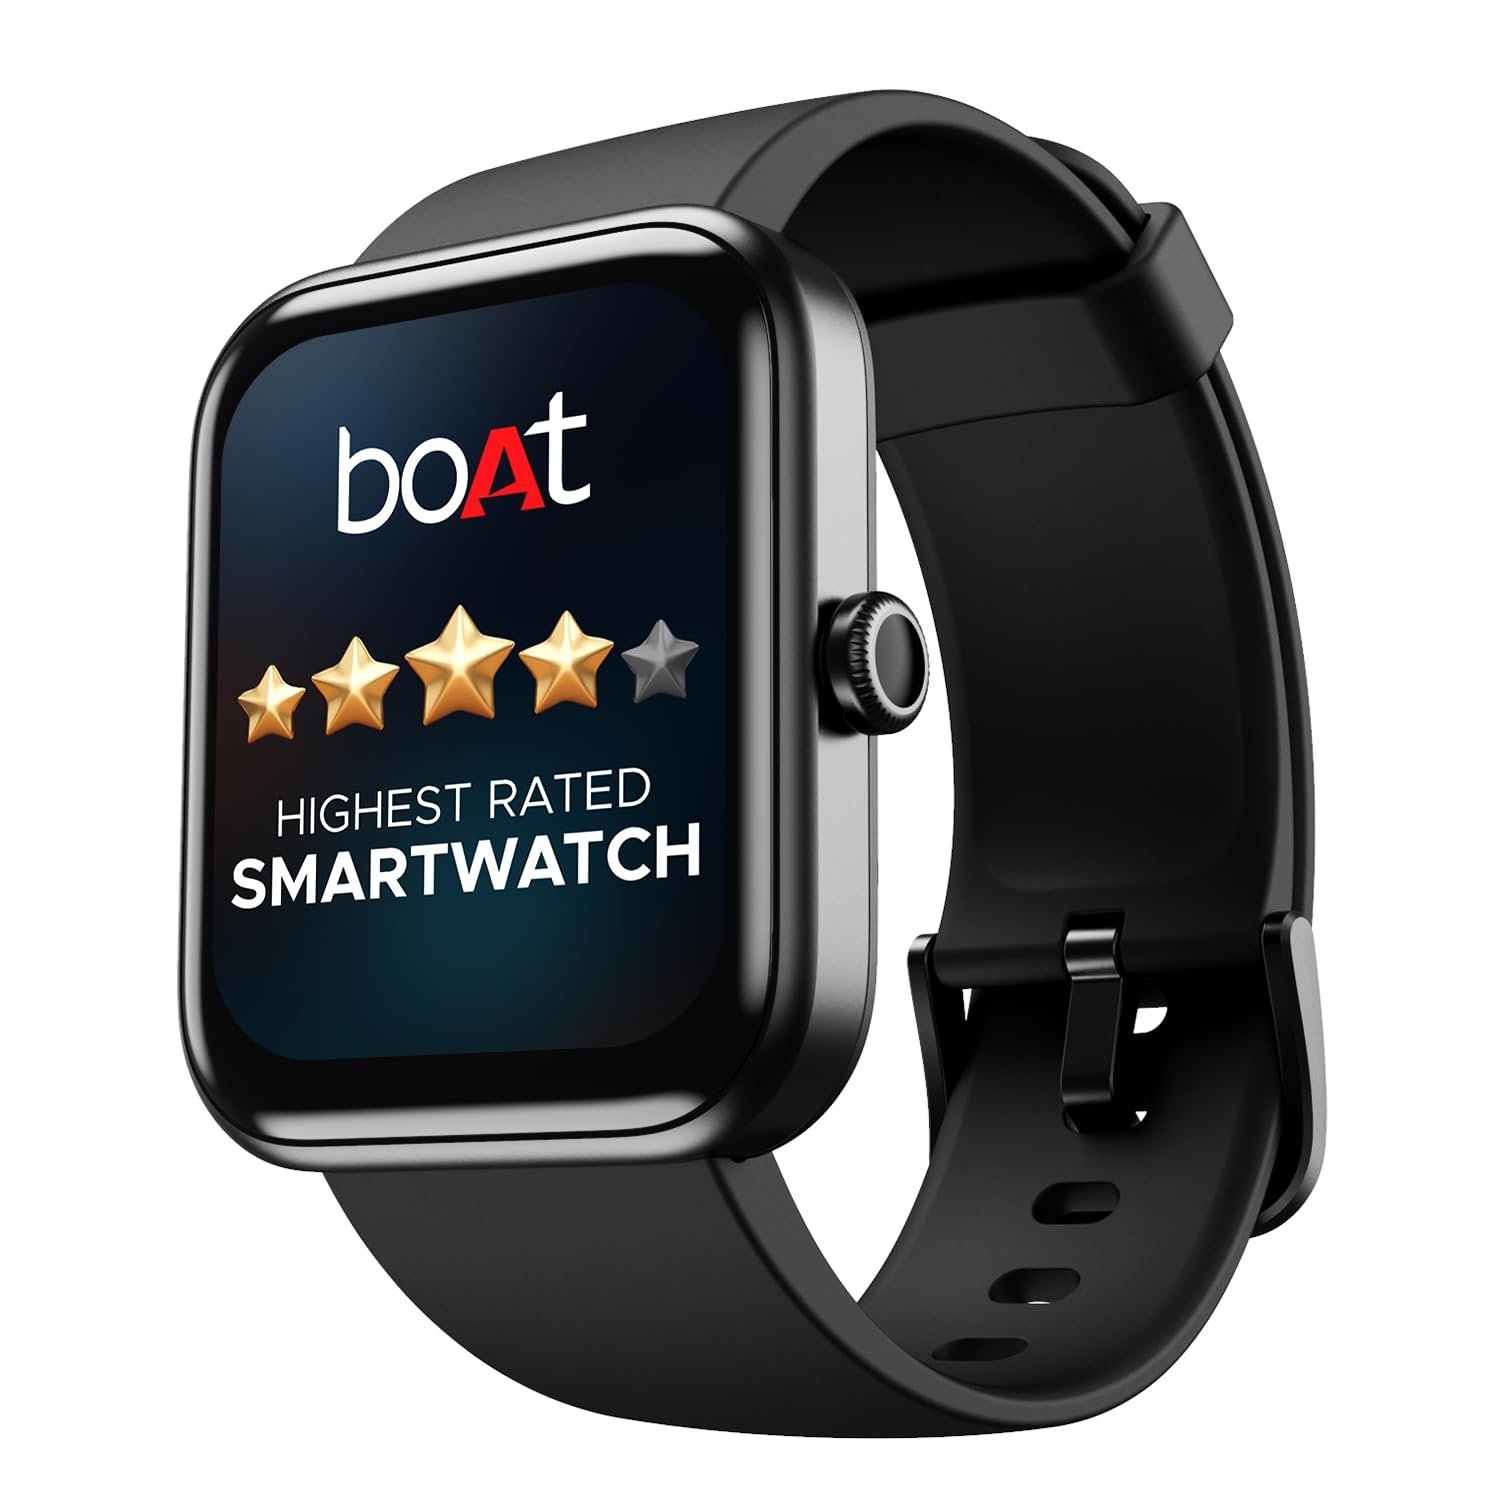 boAt Xtend Smart Watch with Alexa Built-in, 1.69” HD Display, Multiple Watch Faces, Stress Monitor, Heart & SpO2 Monitoring,